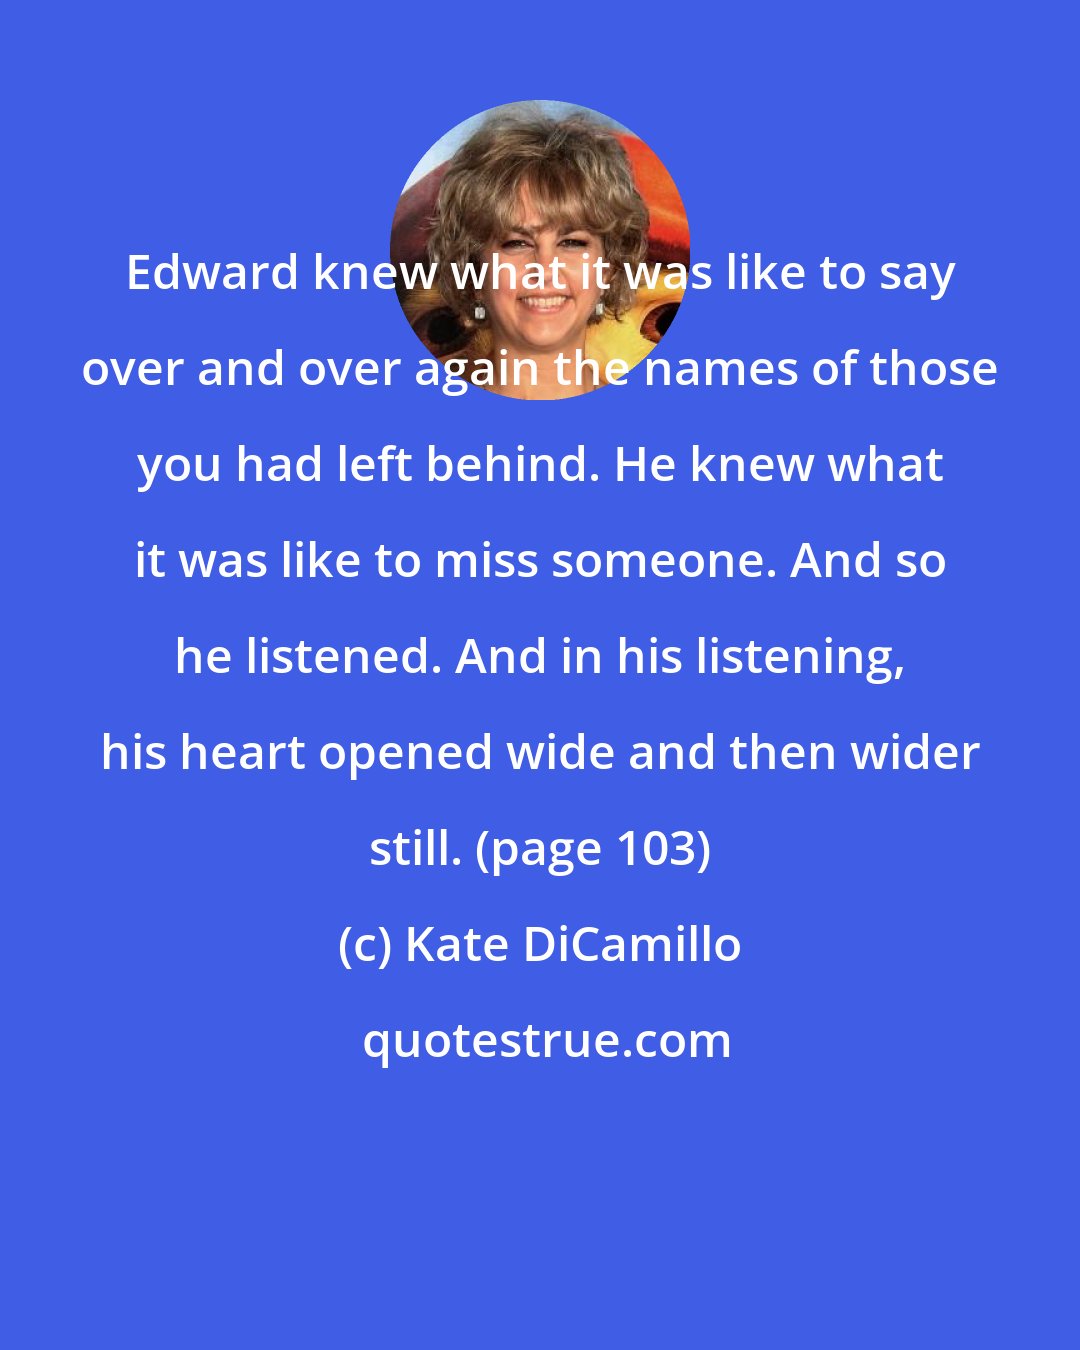 Kate DiCamillo: Edward knew what it was like to say over and over again the names of those you had left behind. He knew what it was like to miss someone. And so he listened. And in his listening, his heart opened wide and then wider still. (page 103)